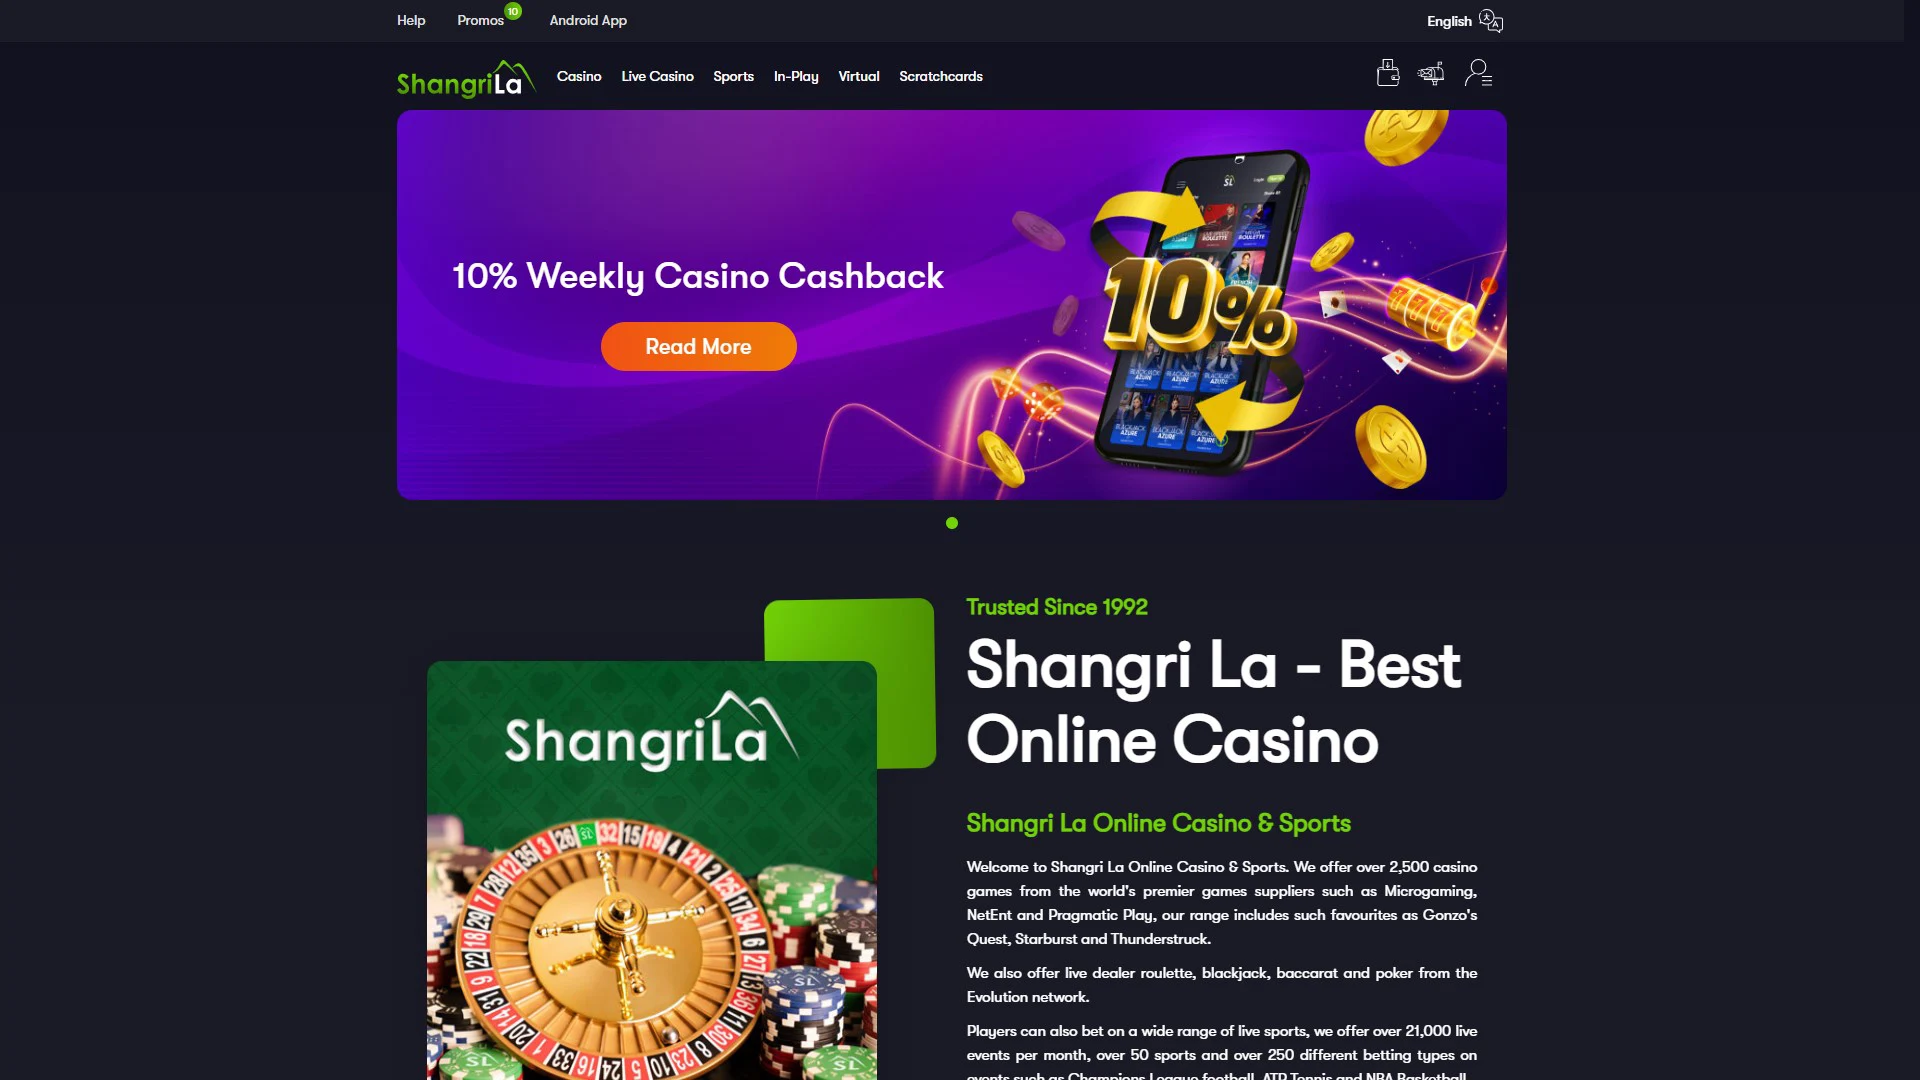 Complete the transaction and start playing casino games online.